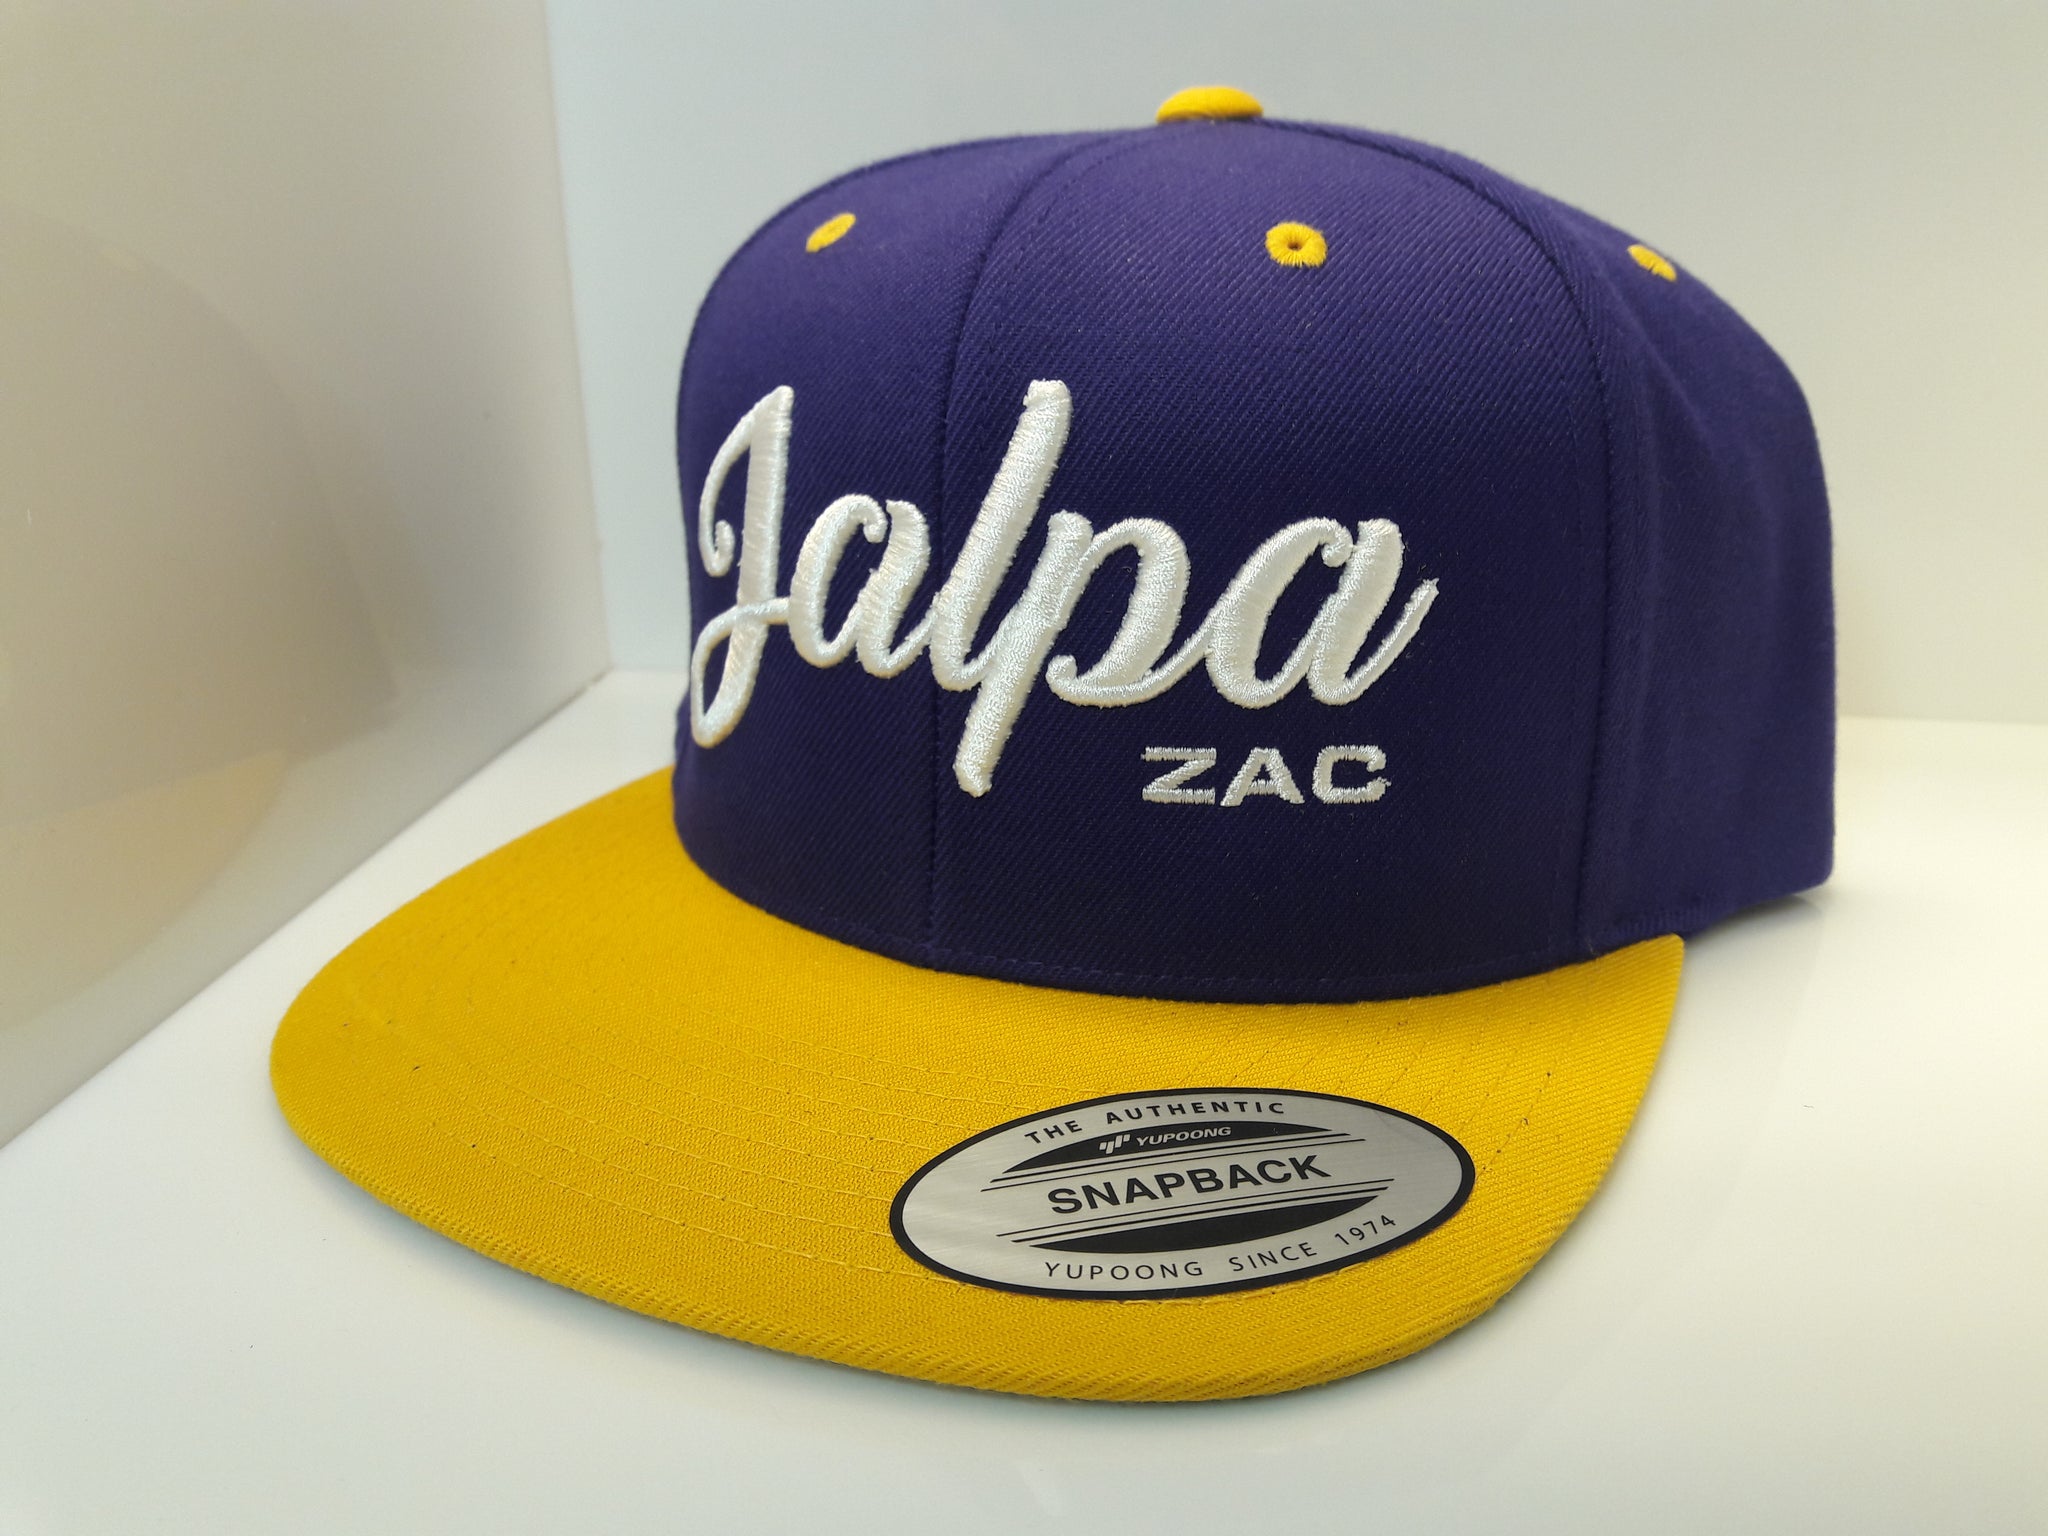 3D Embroidered Purple and Gold Jalpa Zac Flexfit - Classic Snapback Two-Tone Cap